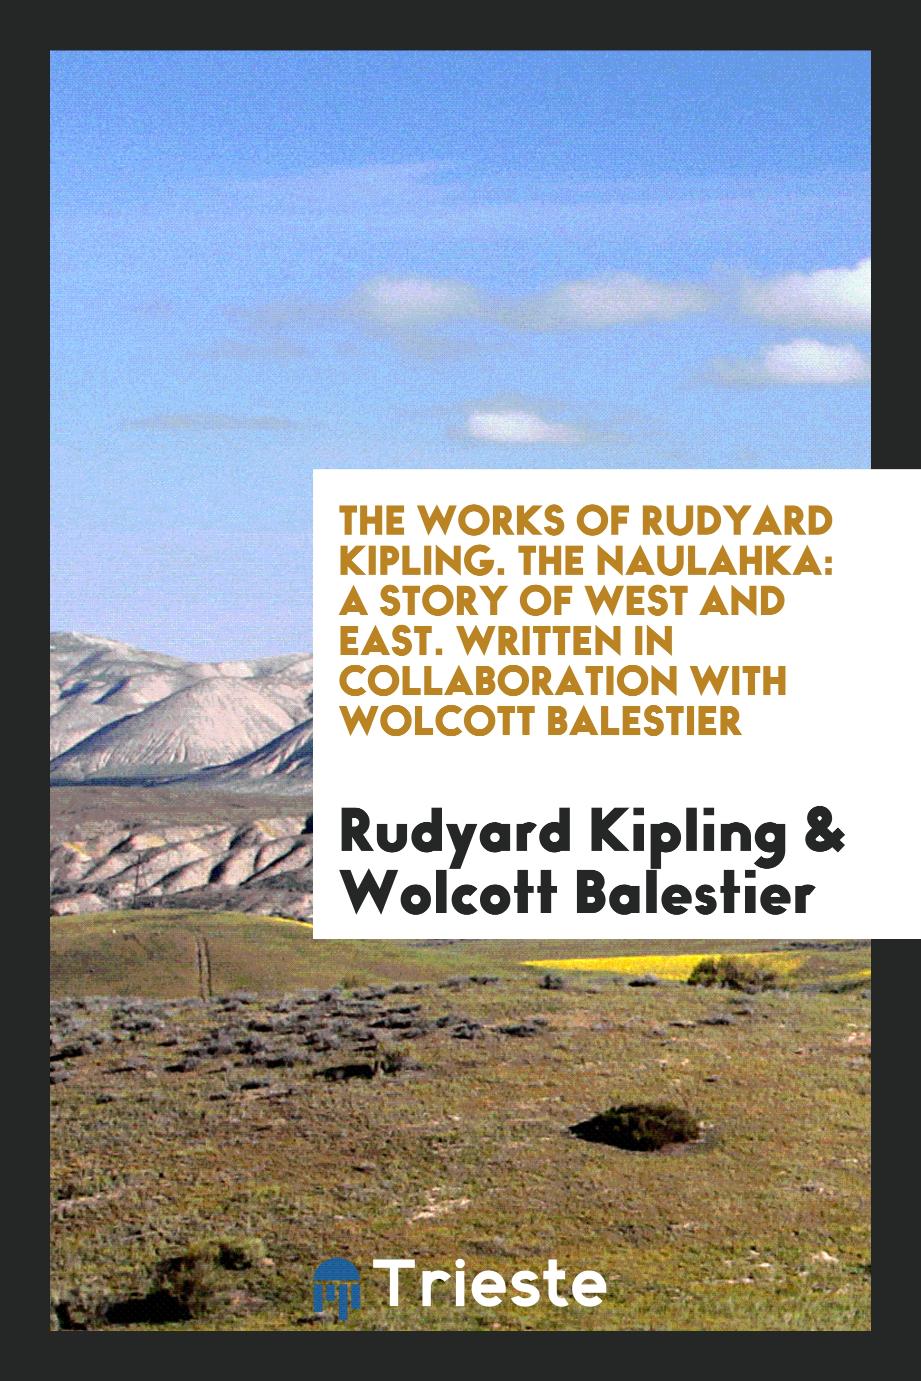 The Works of Rudyard Kipling. The Naulahka: A Story of West and East. Written in Collaboration with Wolcott Balestier